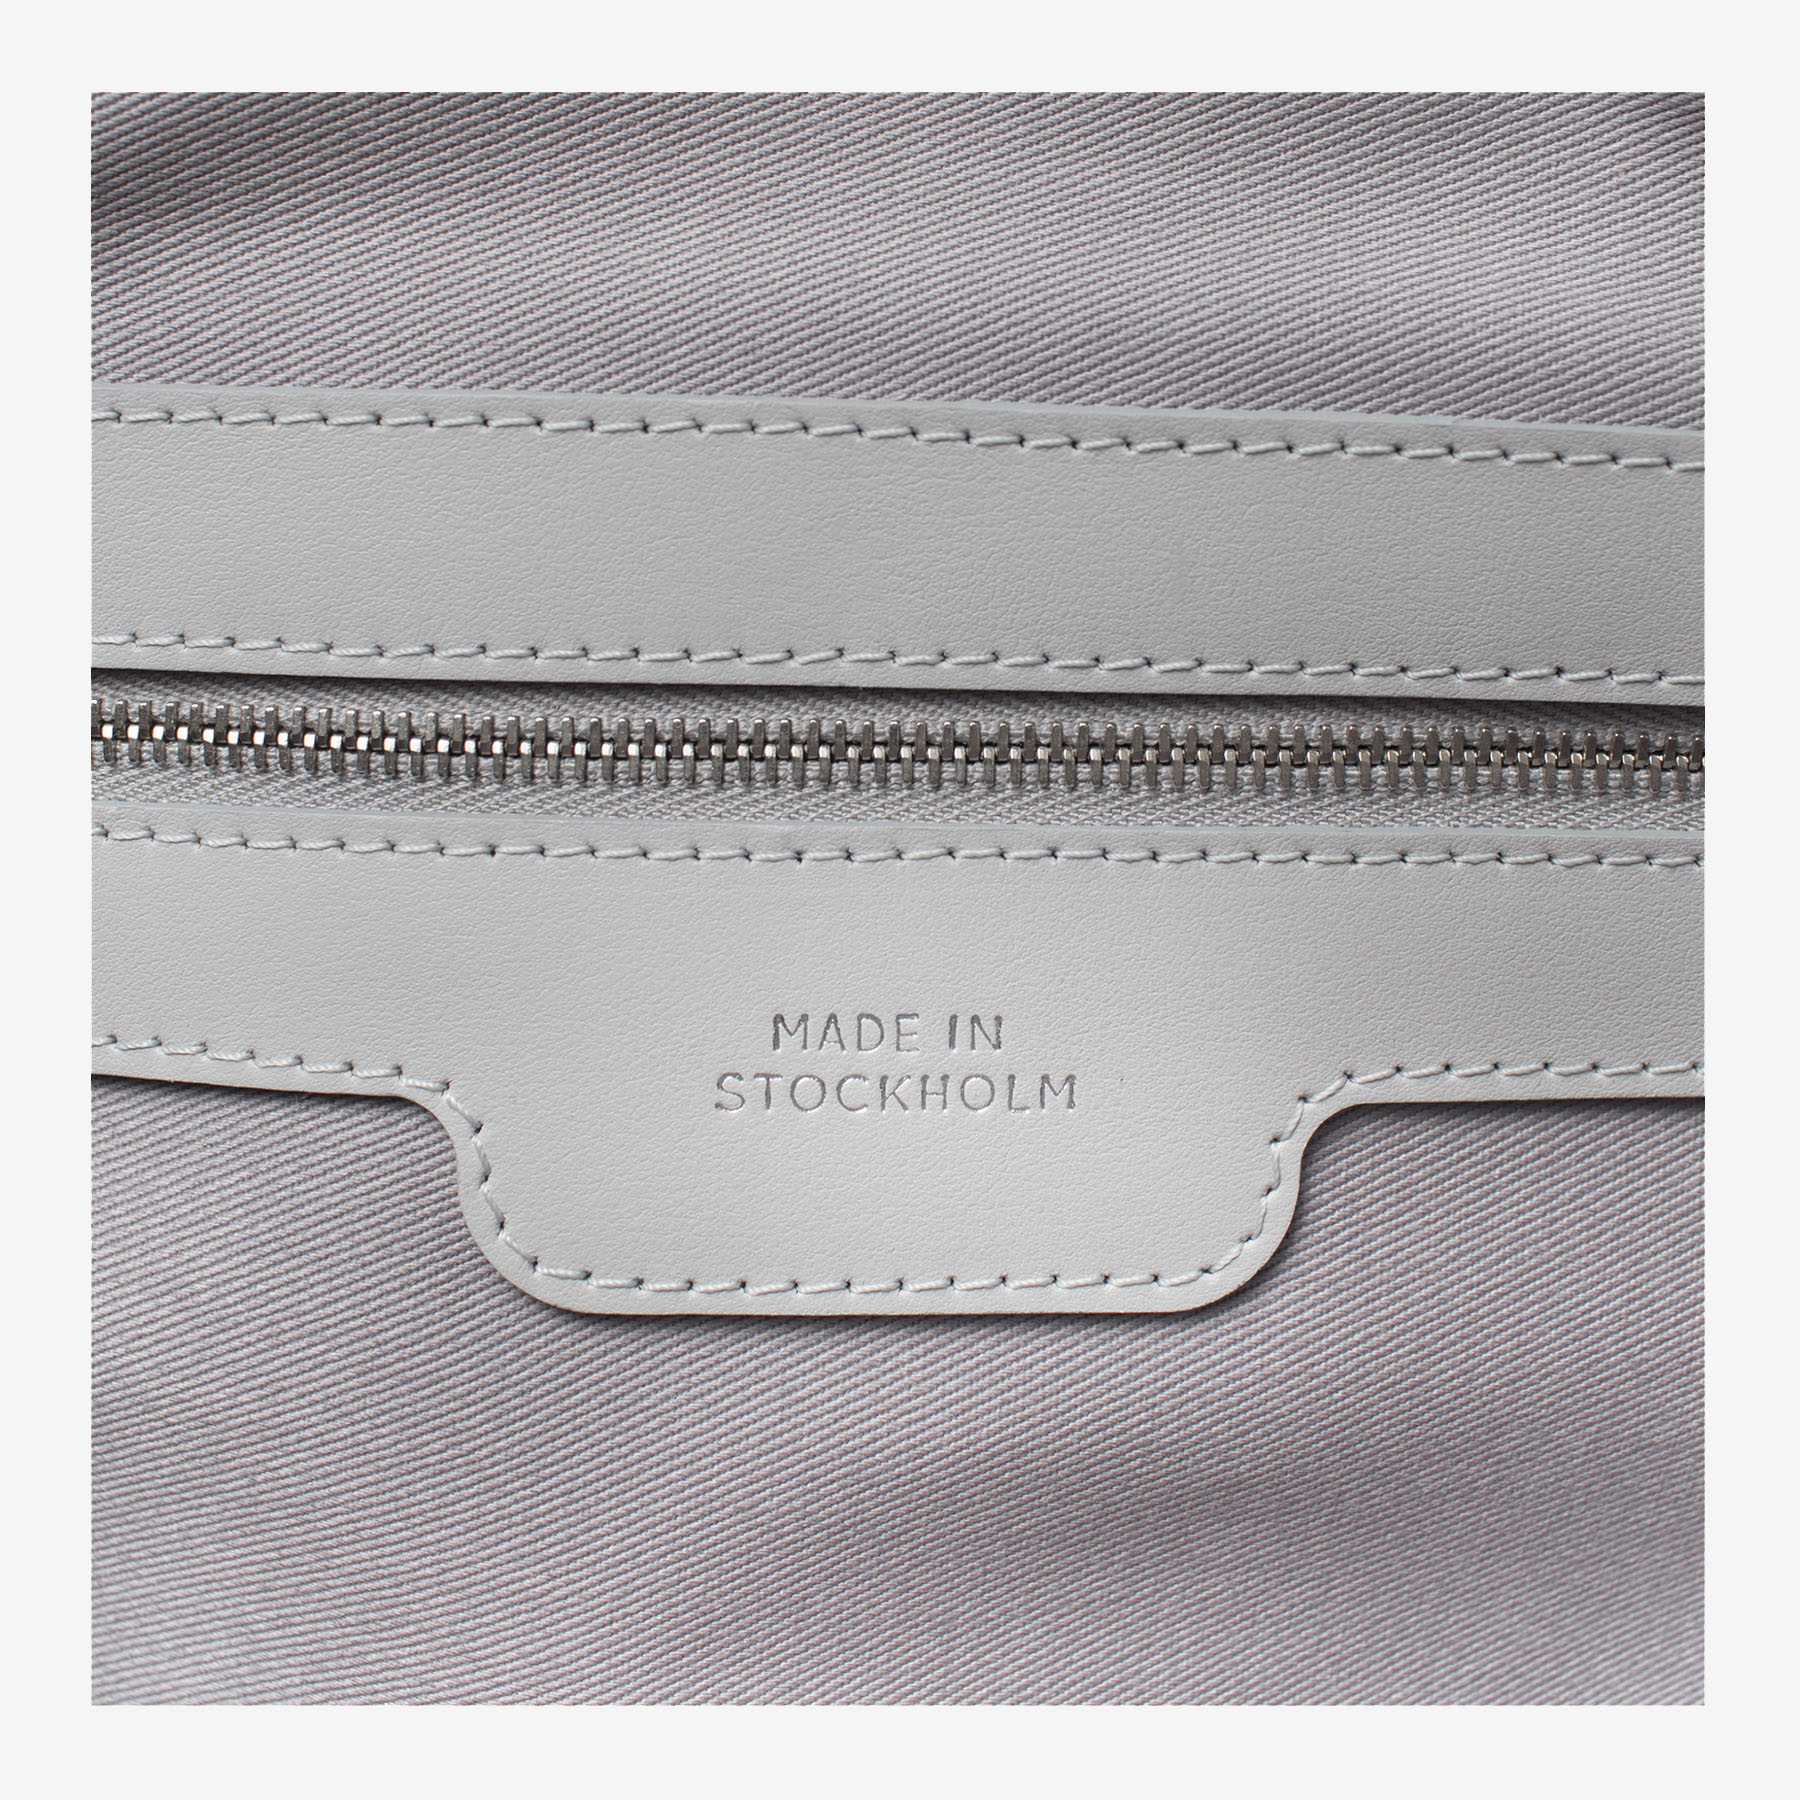 Laimushka leather bag’s interior zip pocket with tag Made in Stockholm